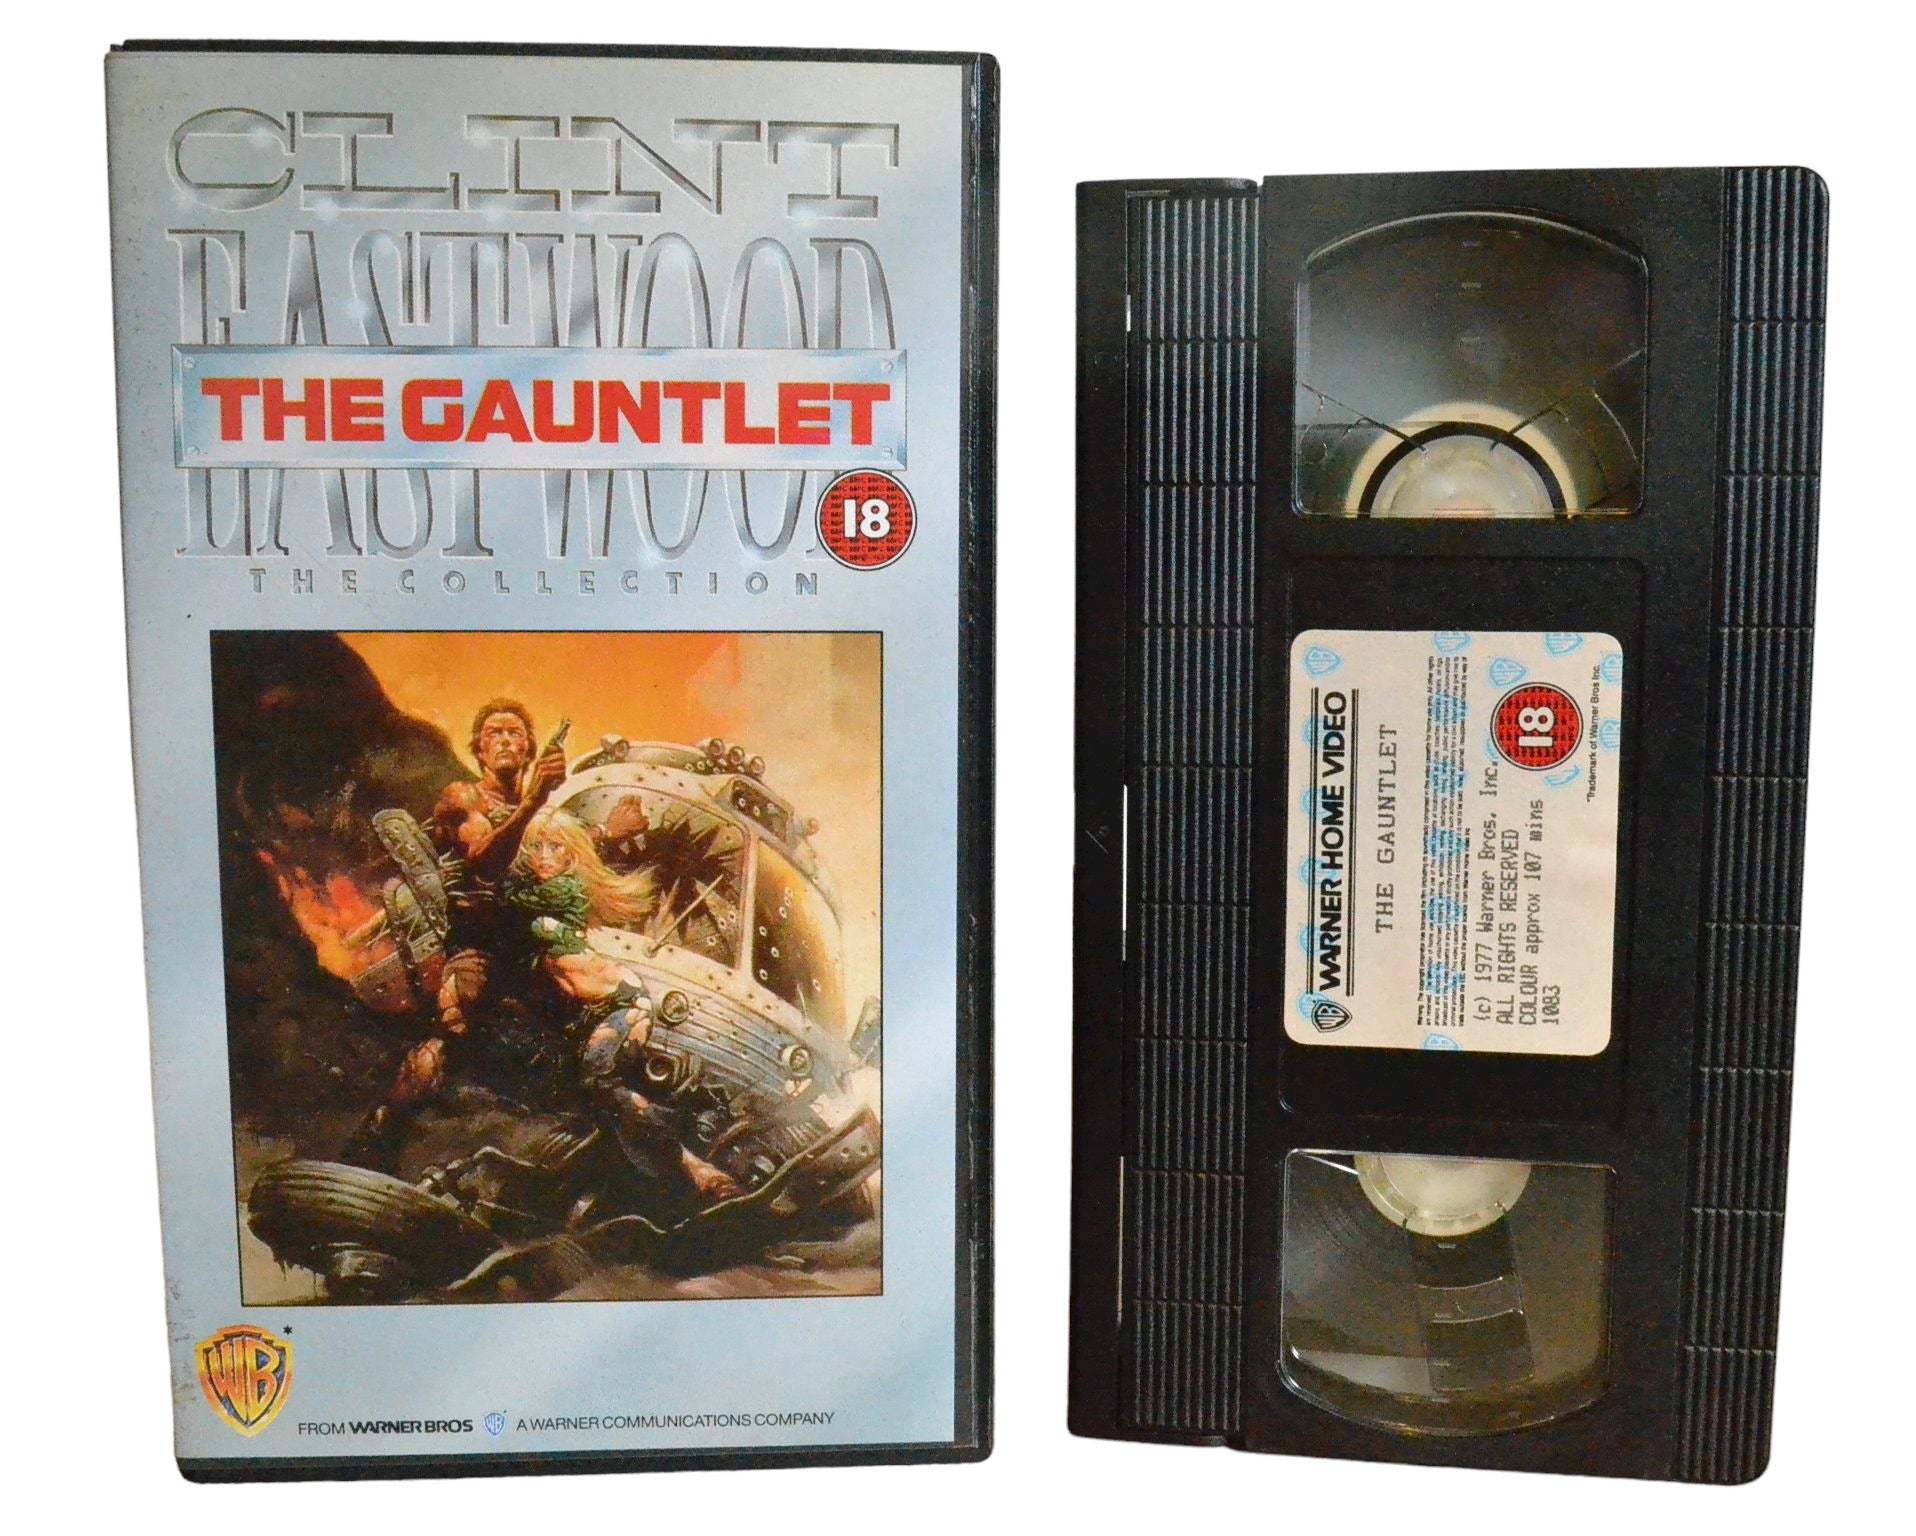 The Gauntlet - Clint Eastwood - Warner Home Video - Action - Pal - VHS-